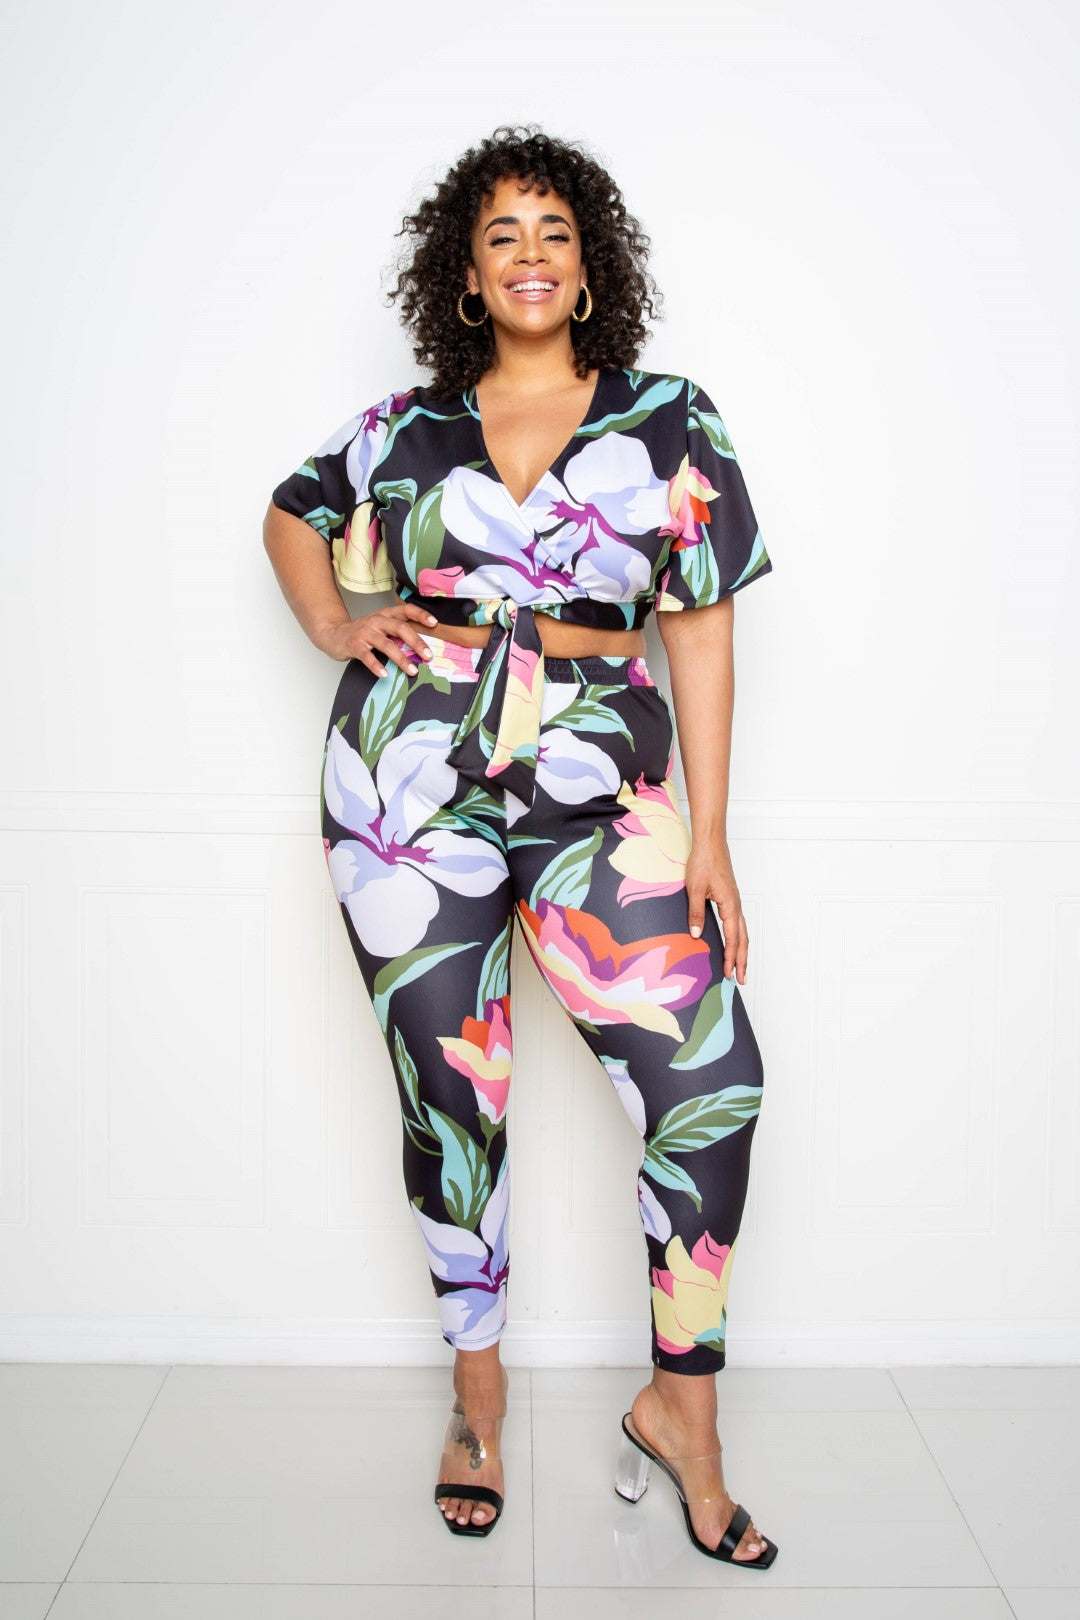 Buxom Couture Mai Tai Floral Pants & Crop Top Set Outfit Sets RYSE Clothing Co. 1XL Multi/Black 